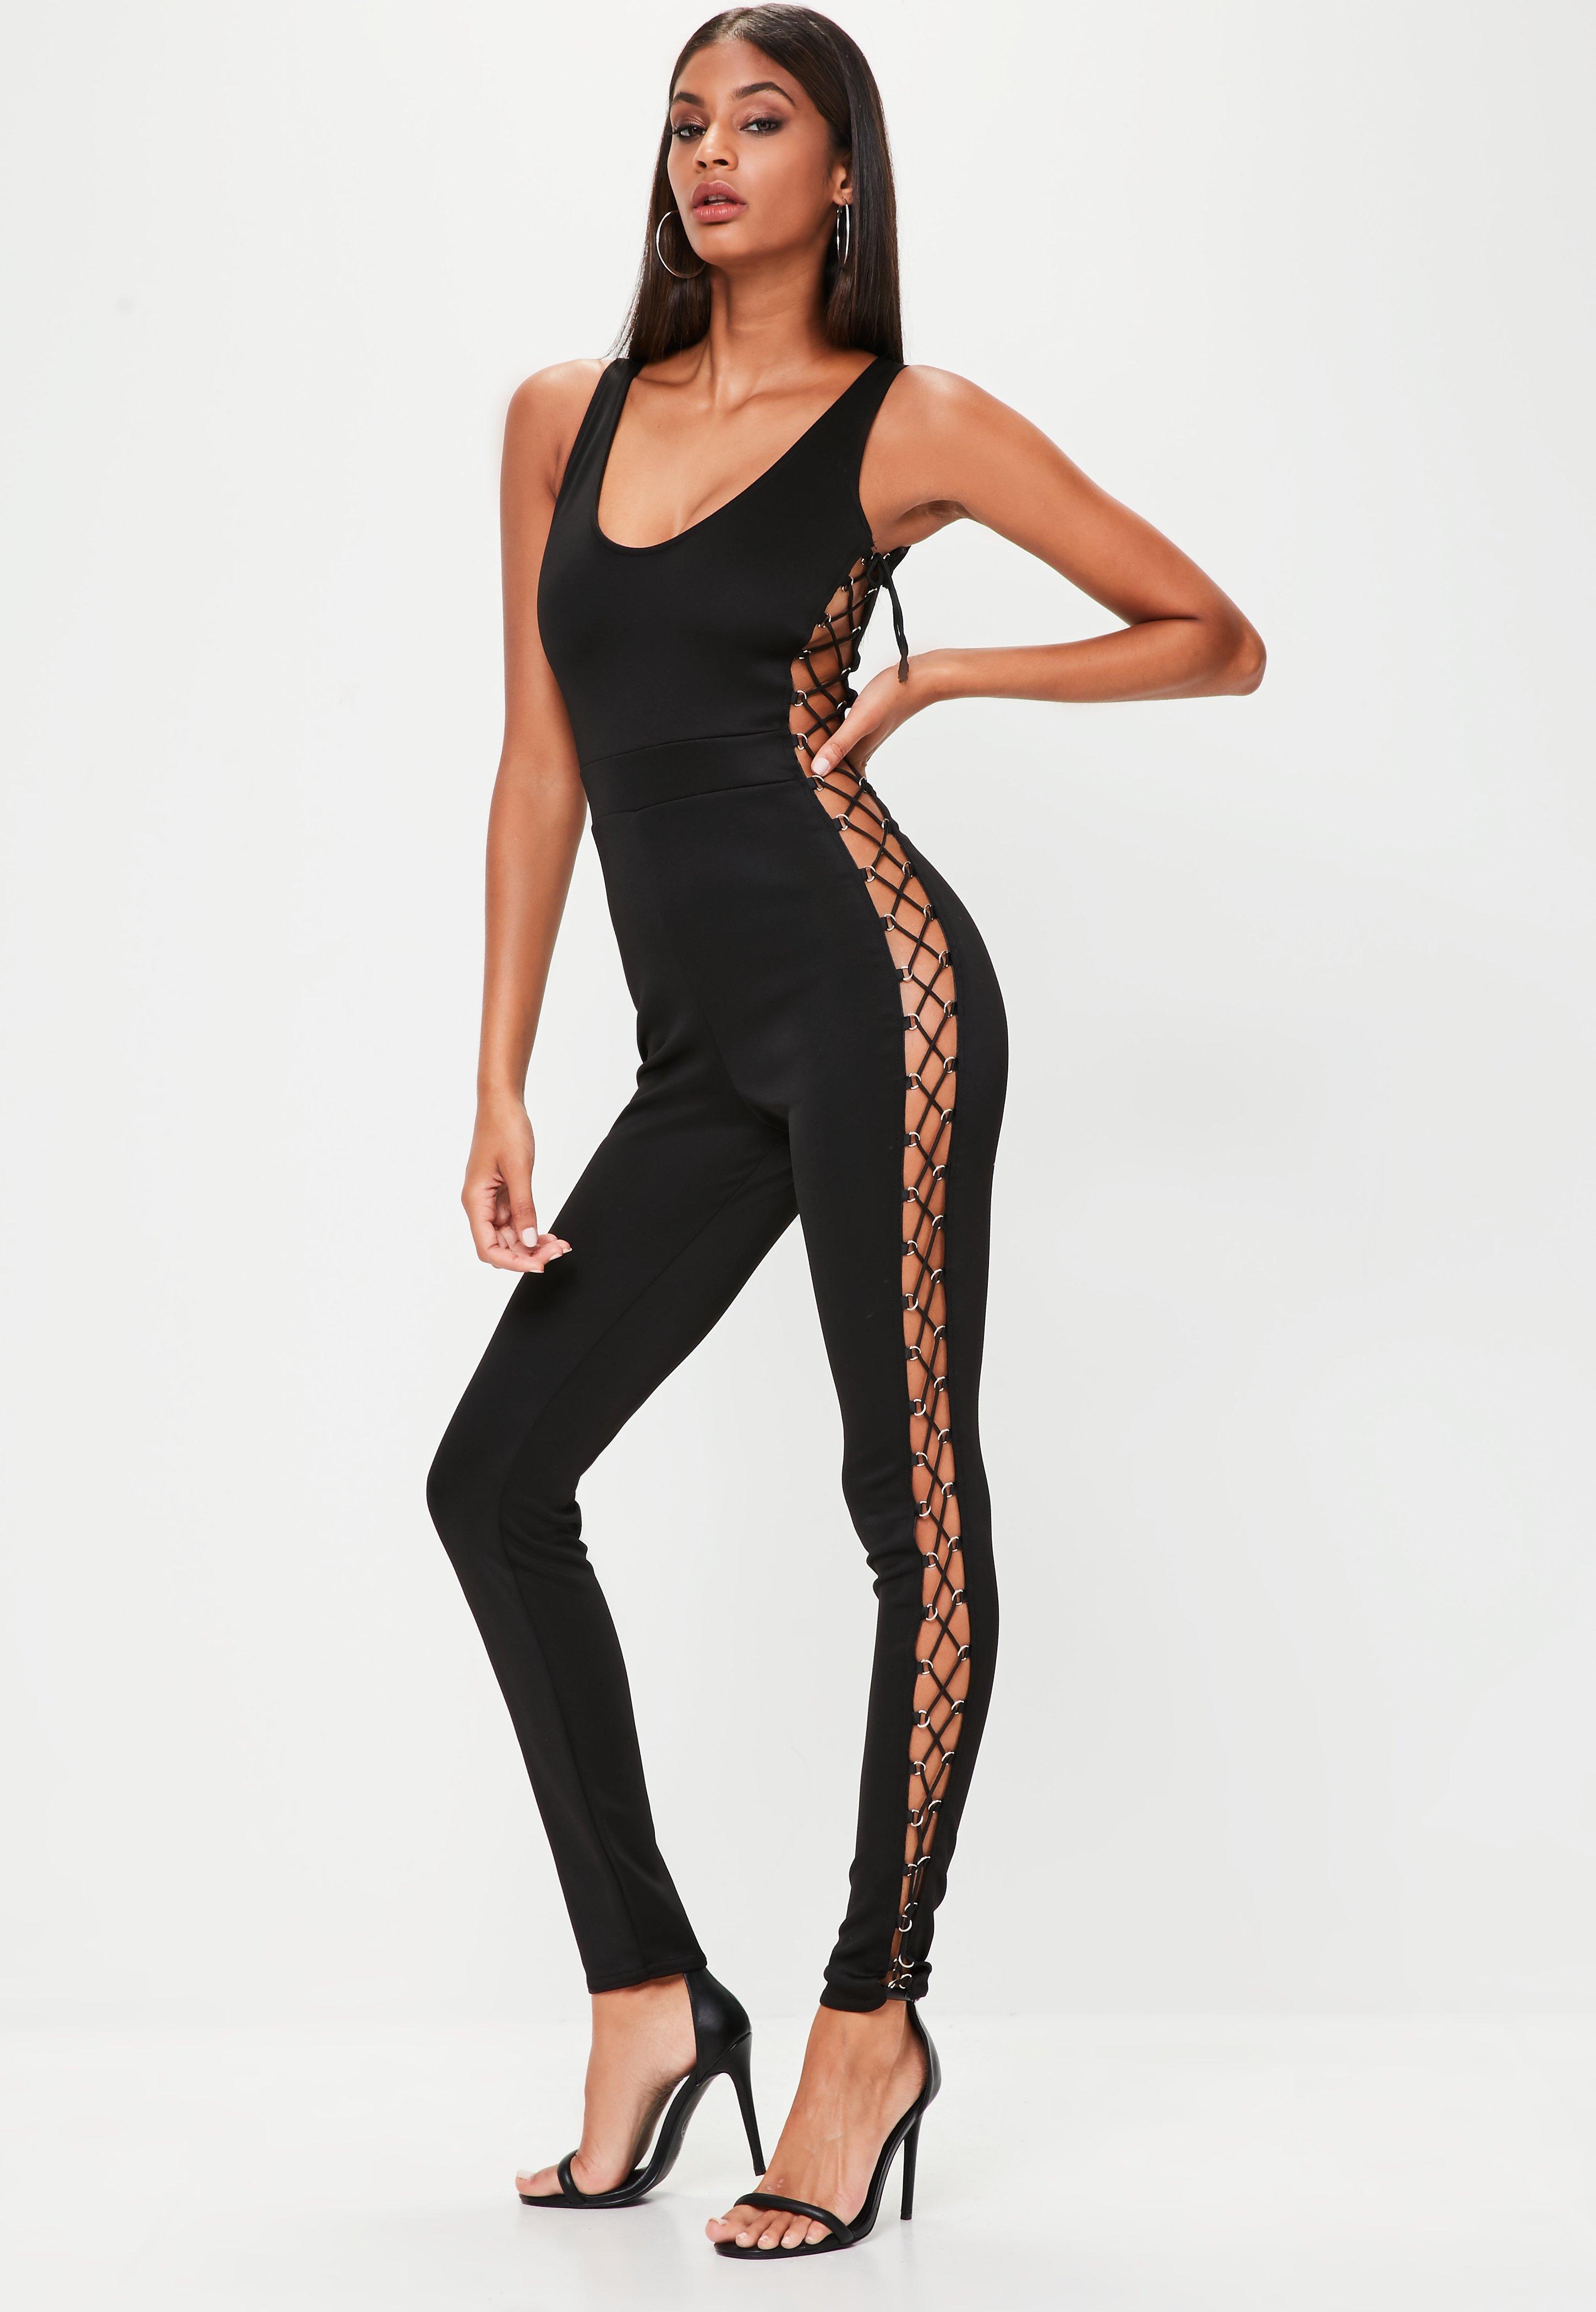 Black Lace Up Jumpsuit Clearance - anuariocidob.org 1687104668